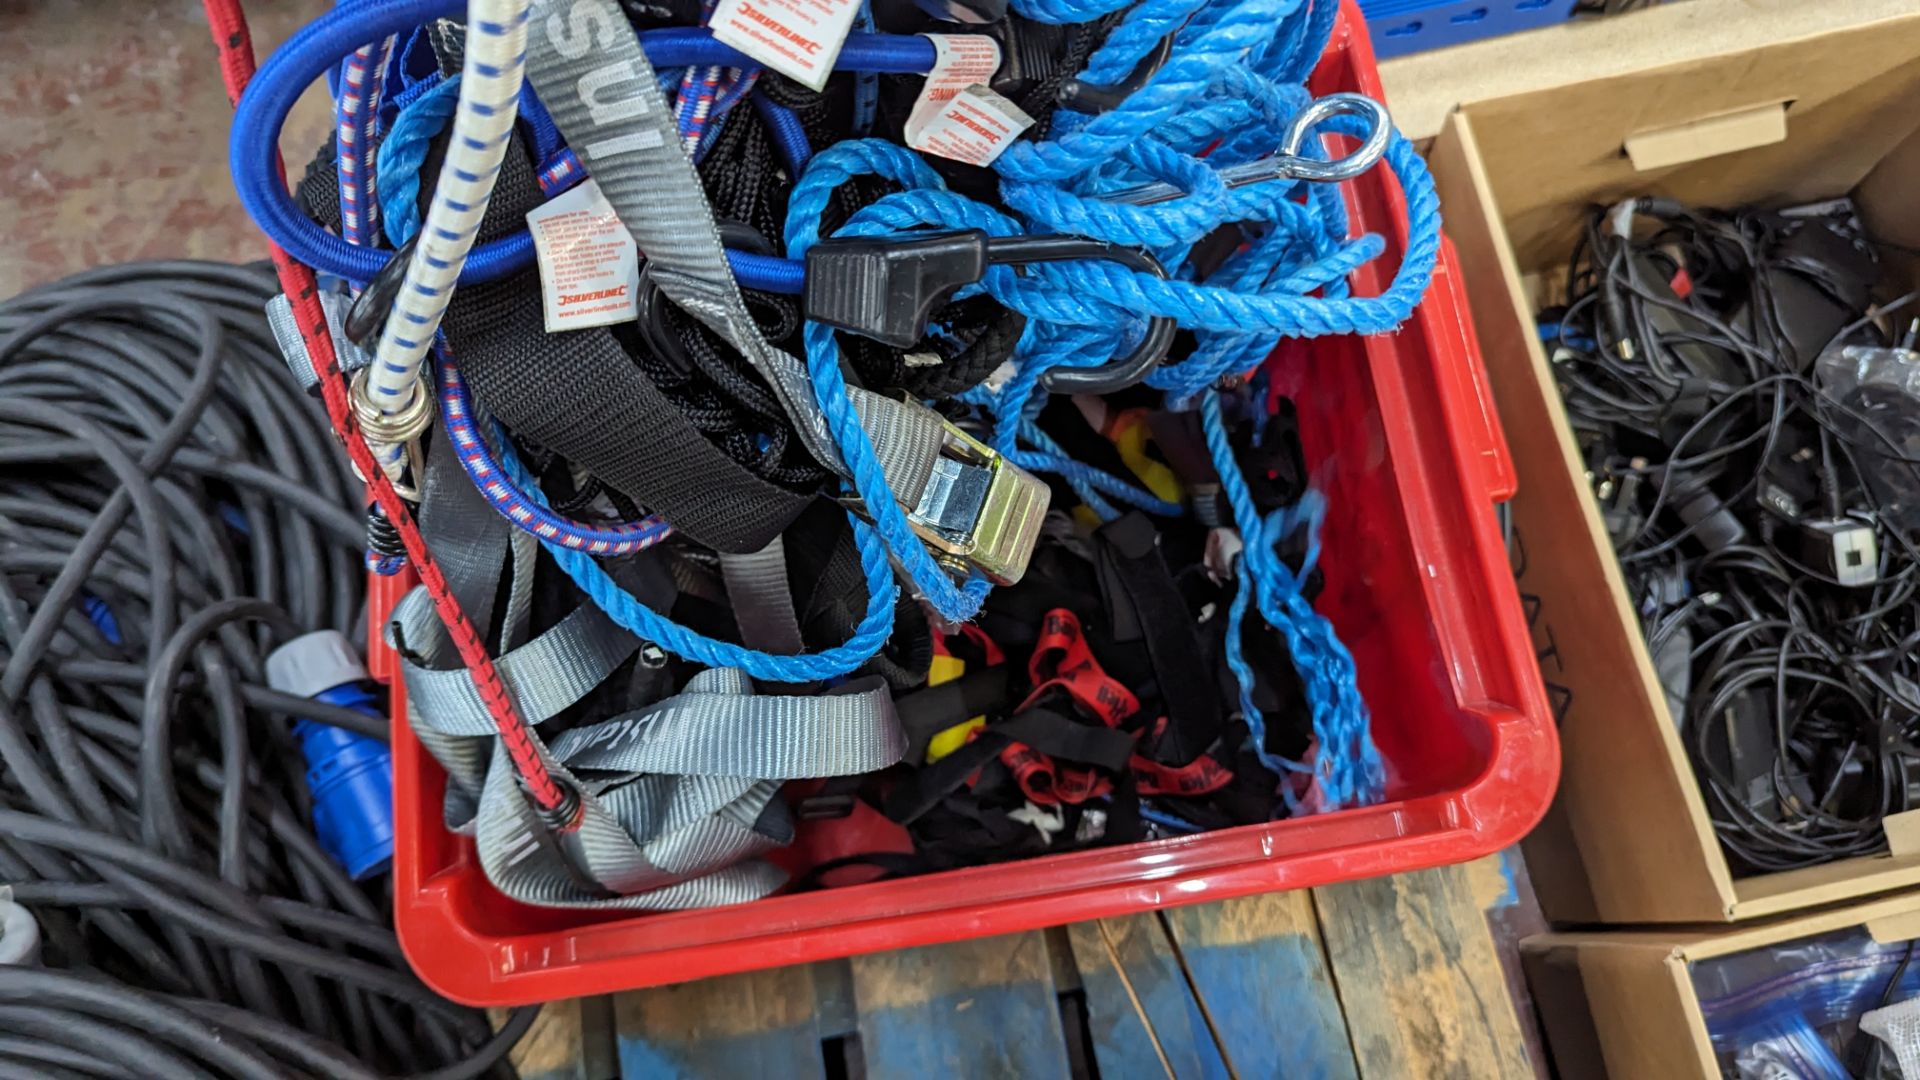 Box of ratchet straps, bungee cords & Velcro - Image 6 of 9